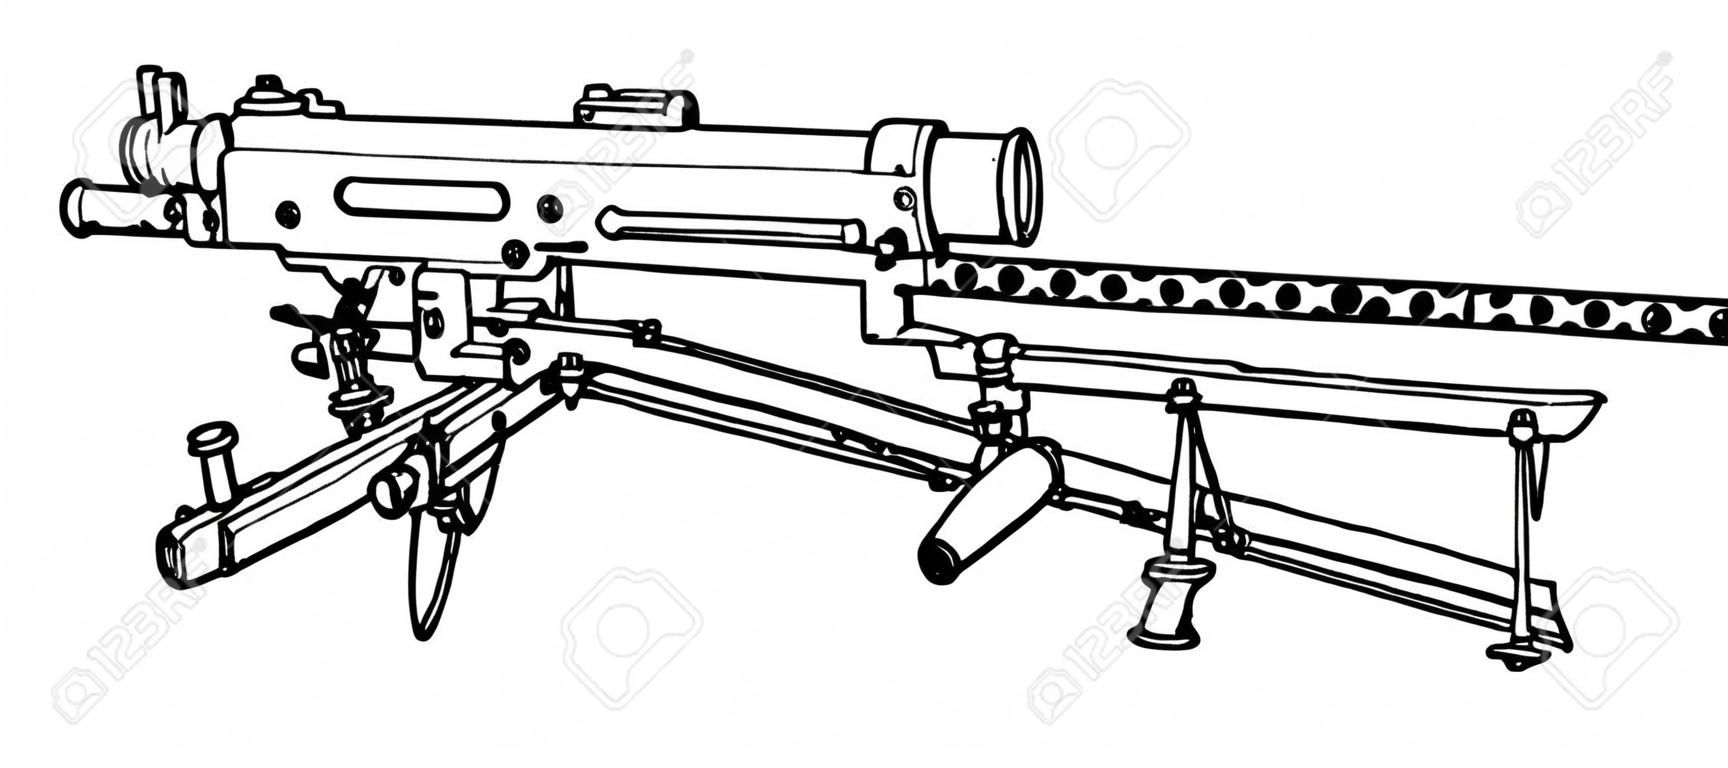 Browning Machine Gun was used as a light infantry, vintage line drawing or engraving illustration.